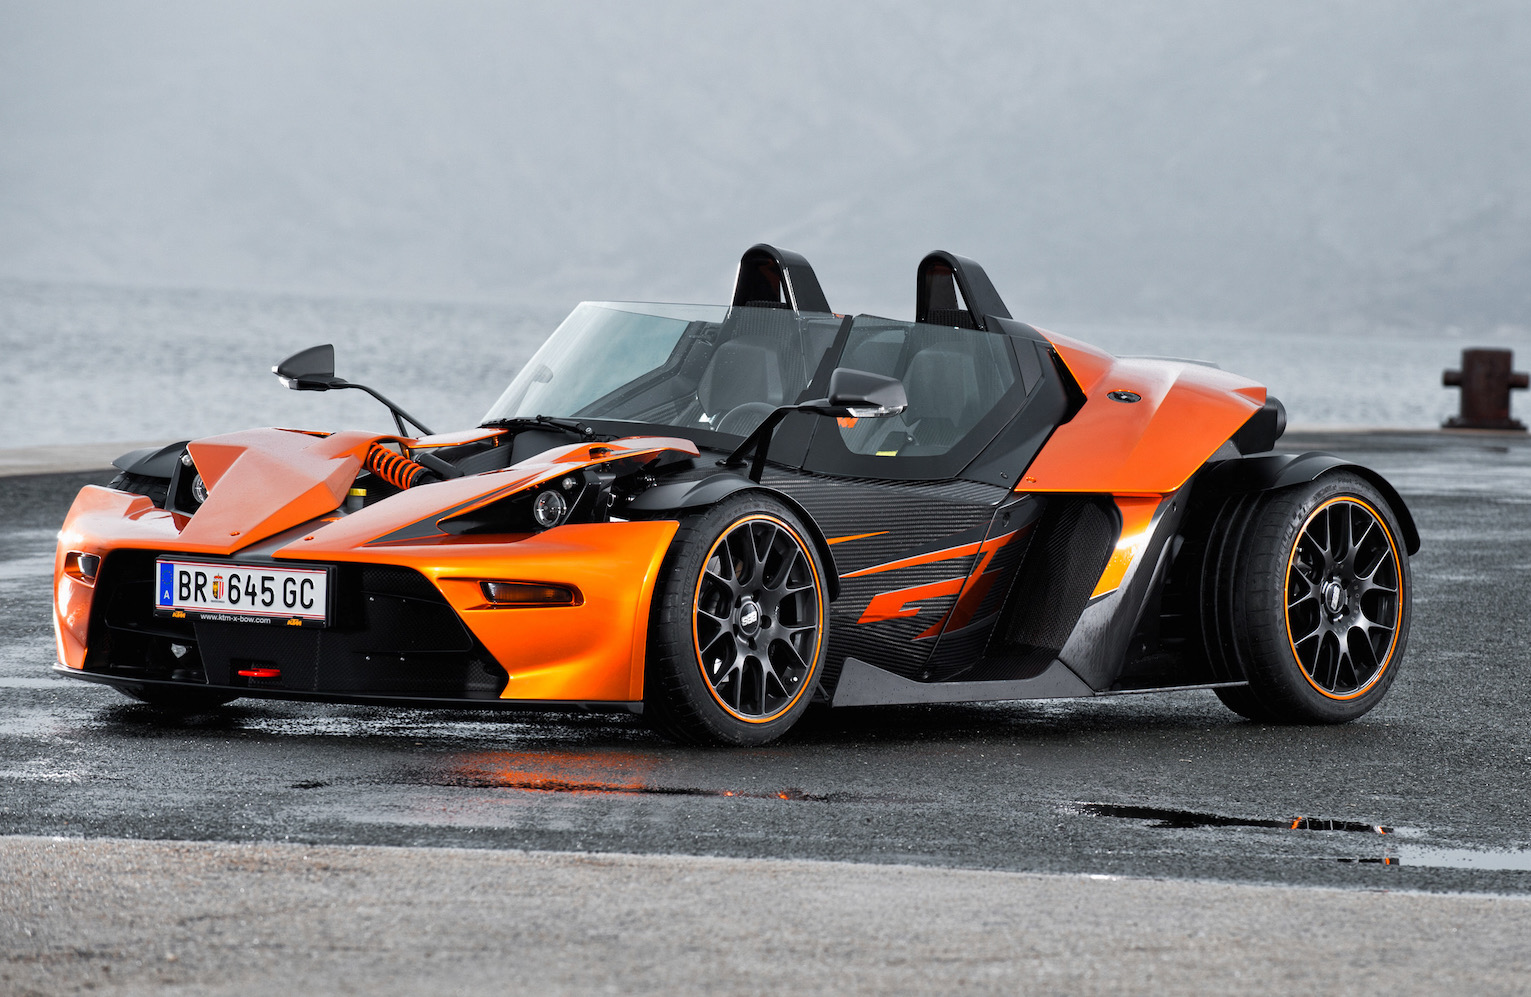 10 Reasons Why We Love The KTM X-Bow